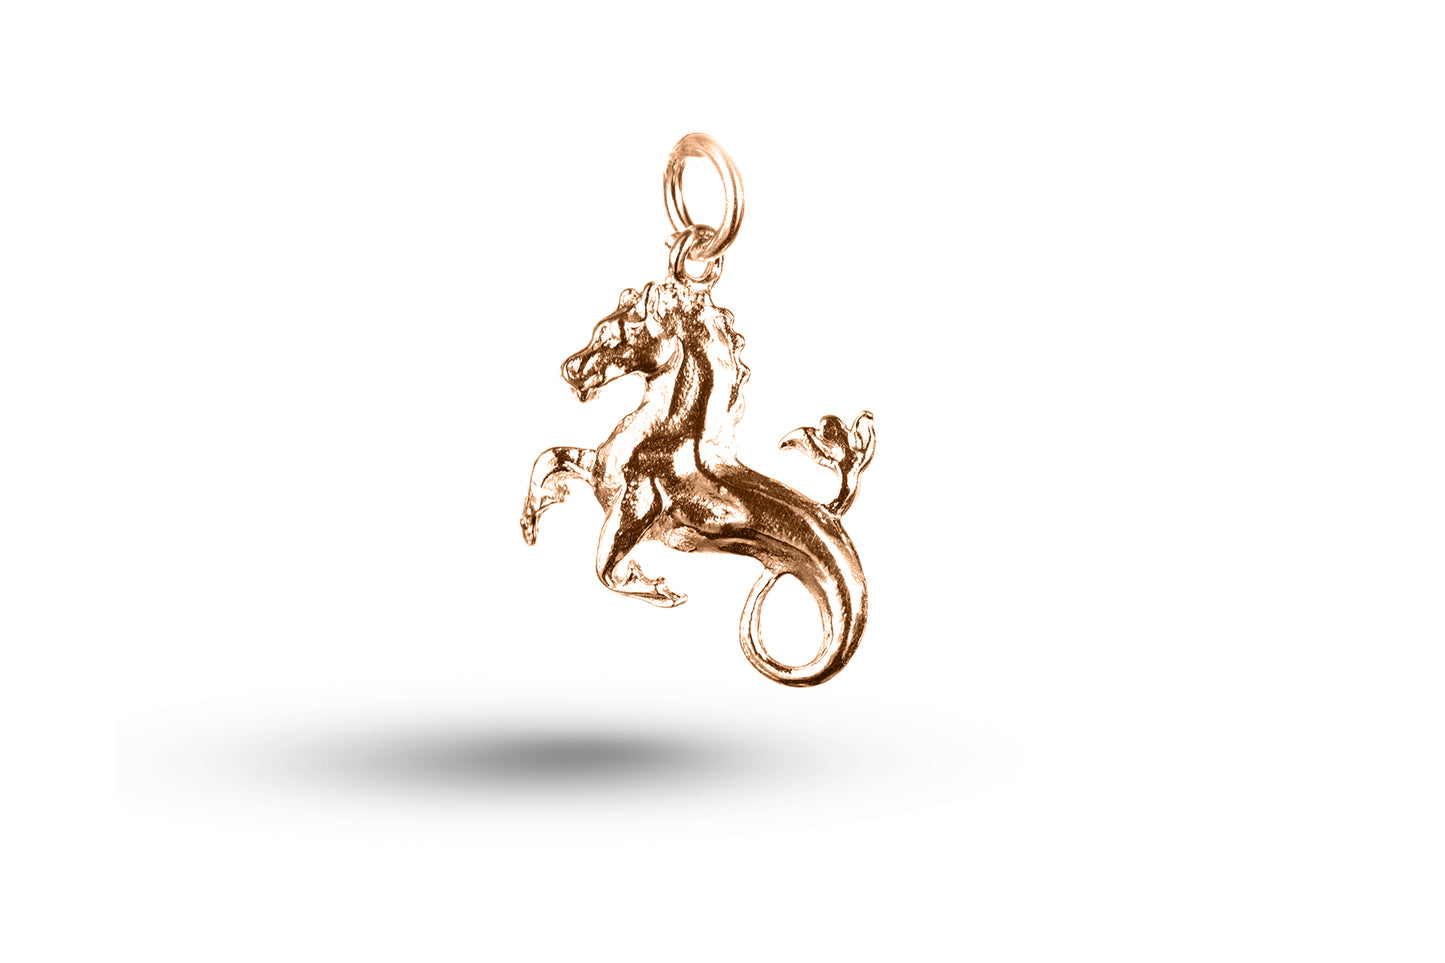 Rose gold Mythical Seahorse charm.